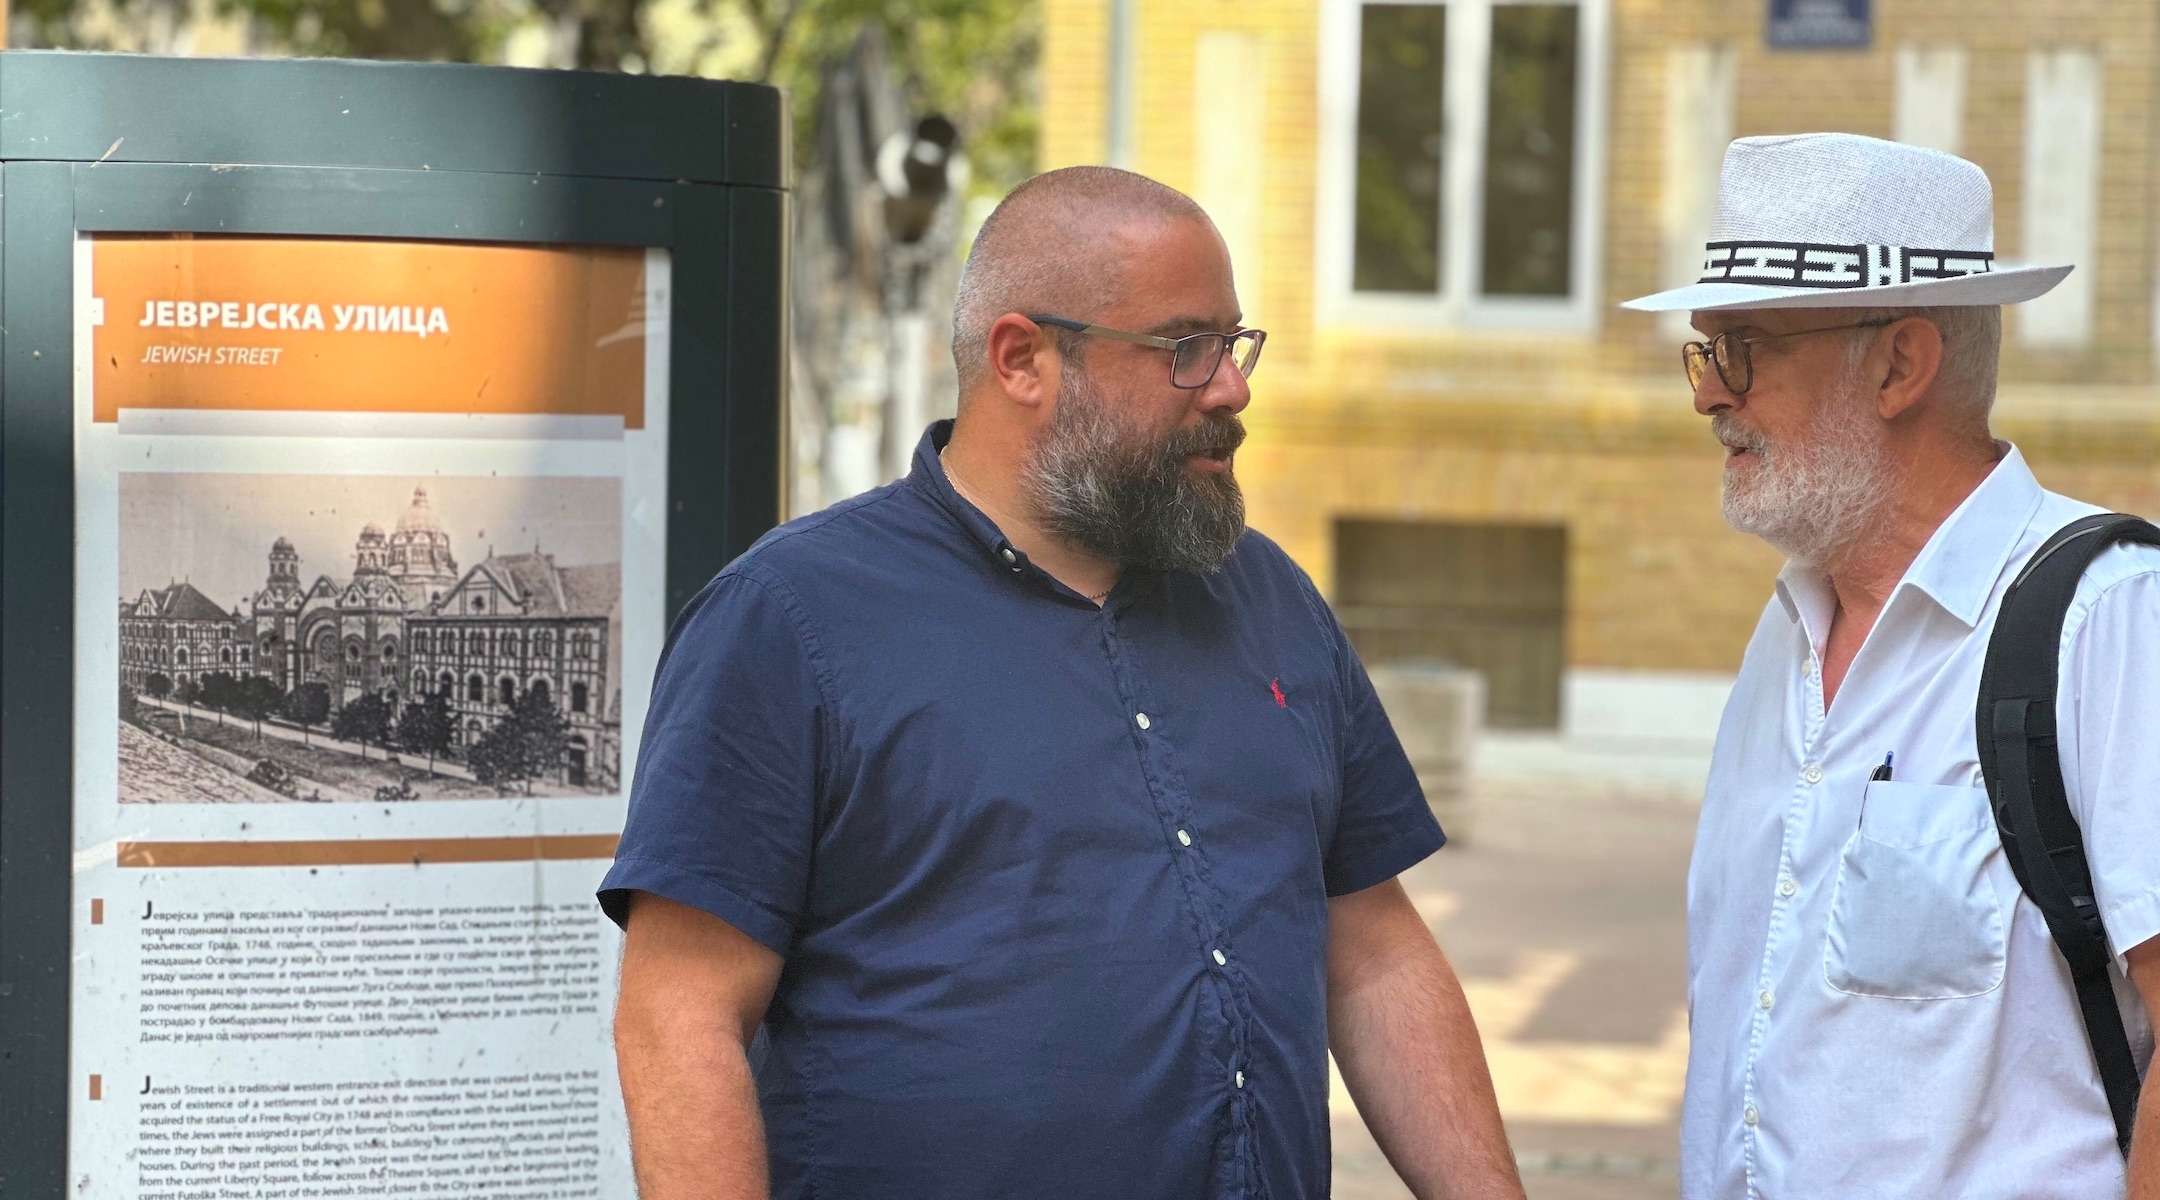 Ladislav Trajer, left, and Mirko Štark, the top two leaders of the Jewish community in Novi Sad, chat just outside the entrance to their synagogue. (Larry Luxner)